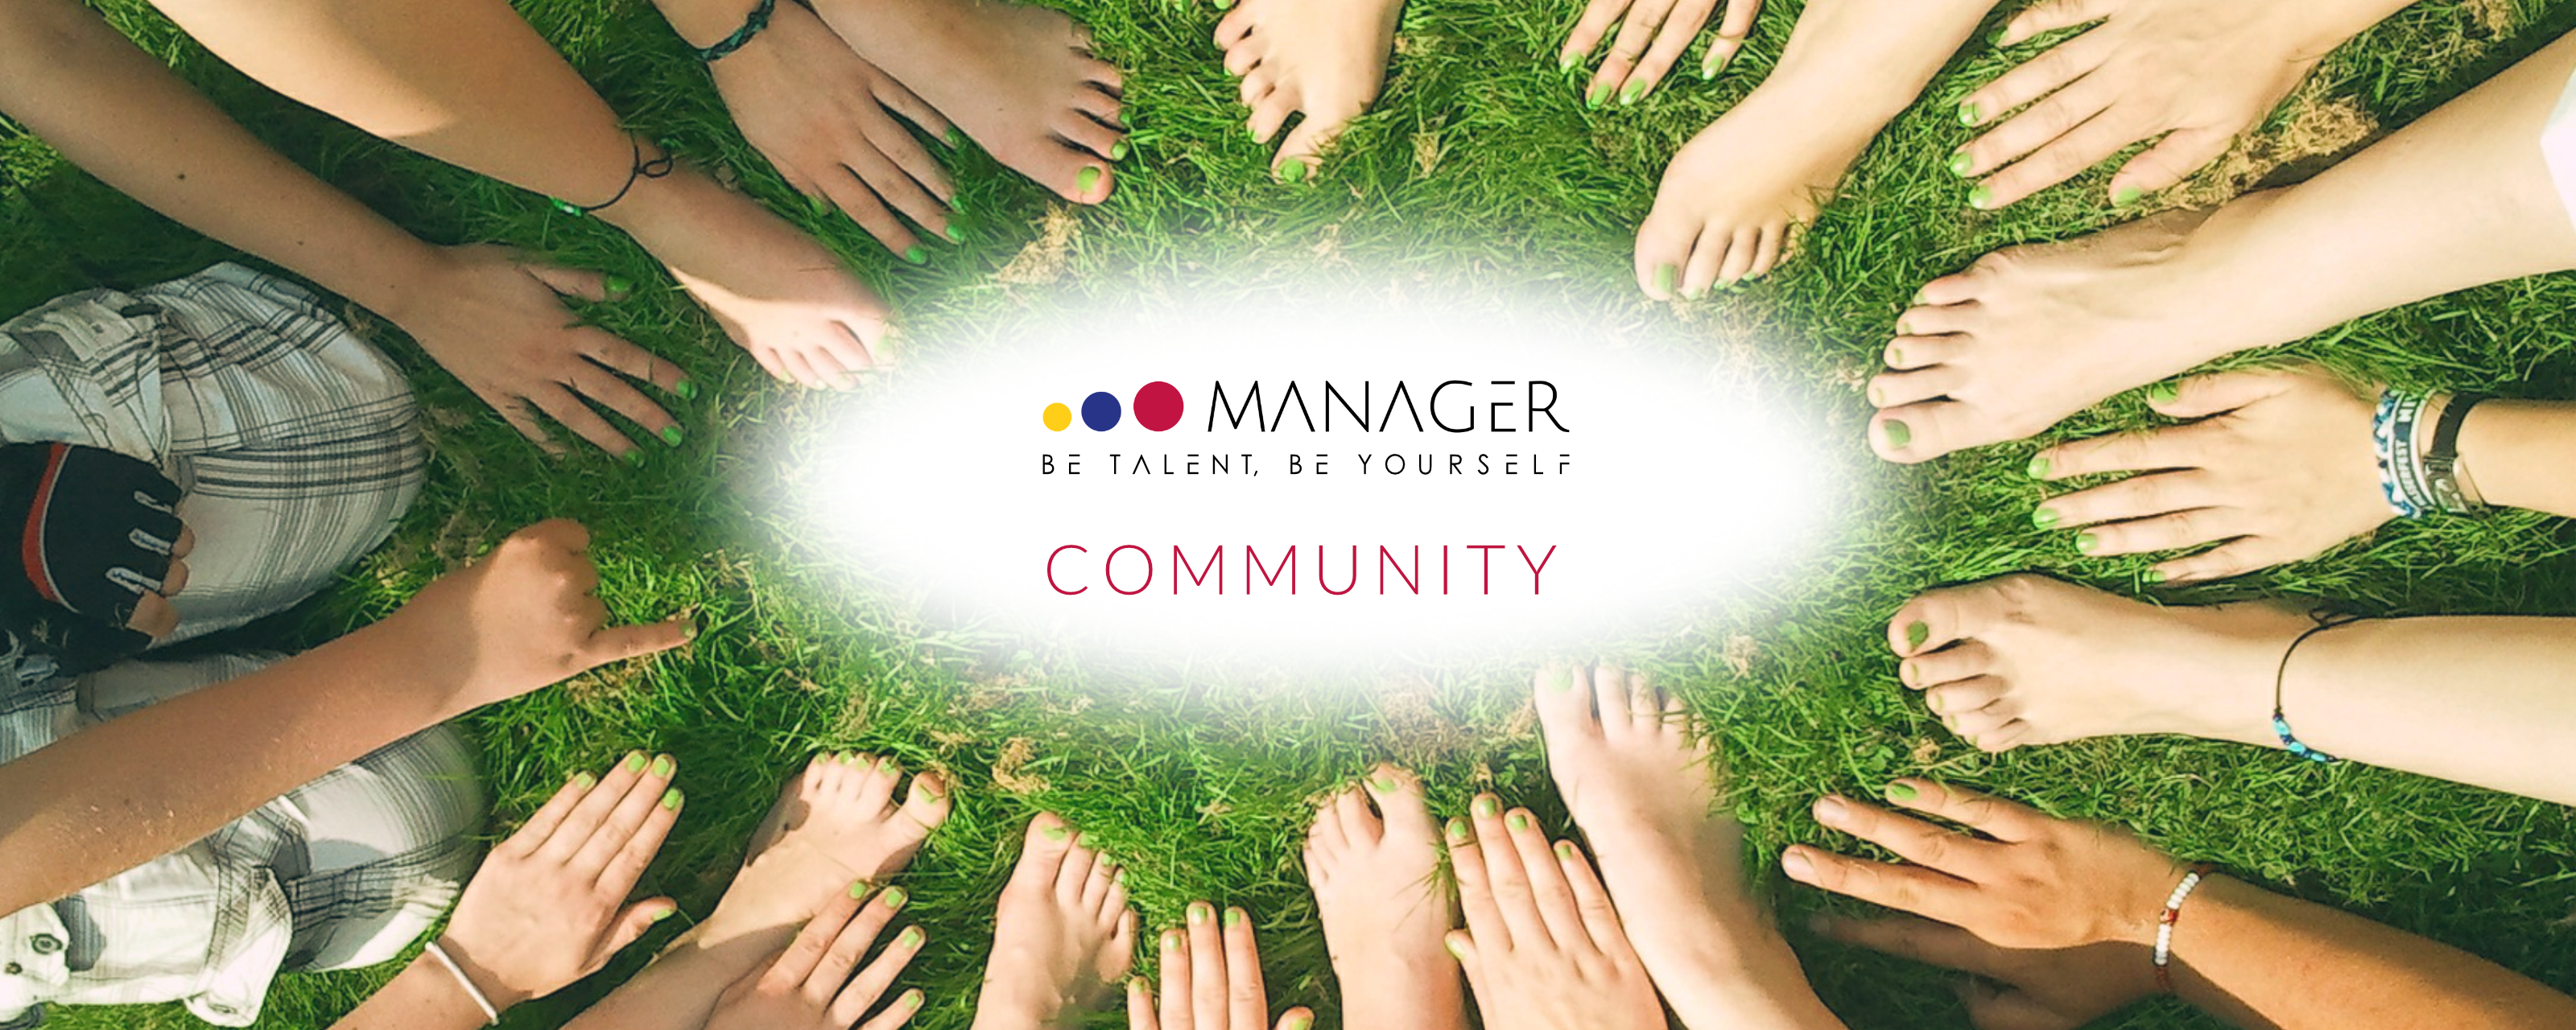 community by manager